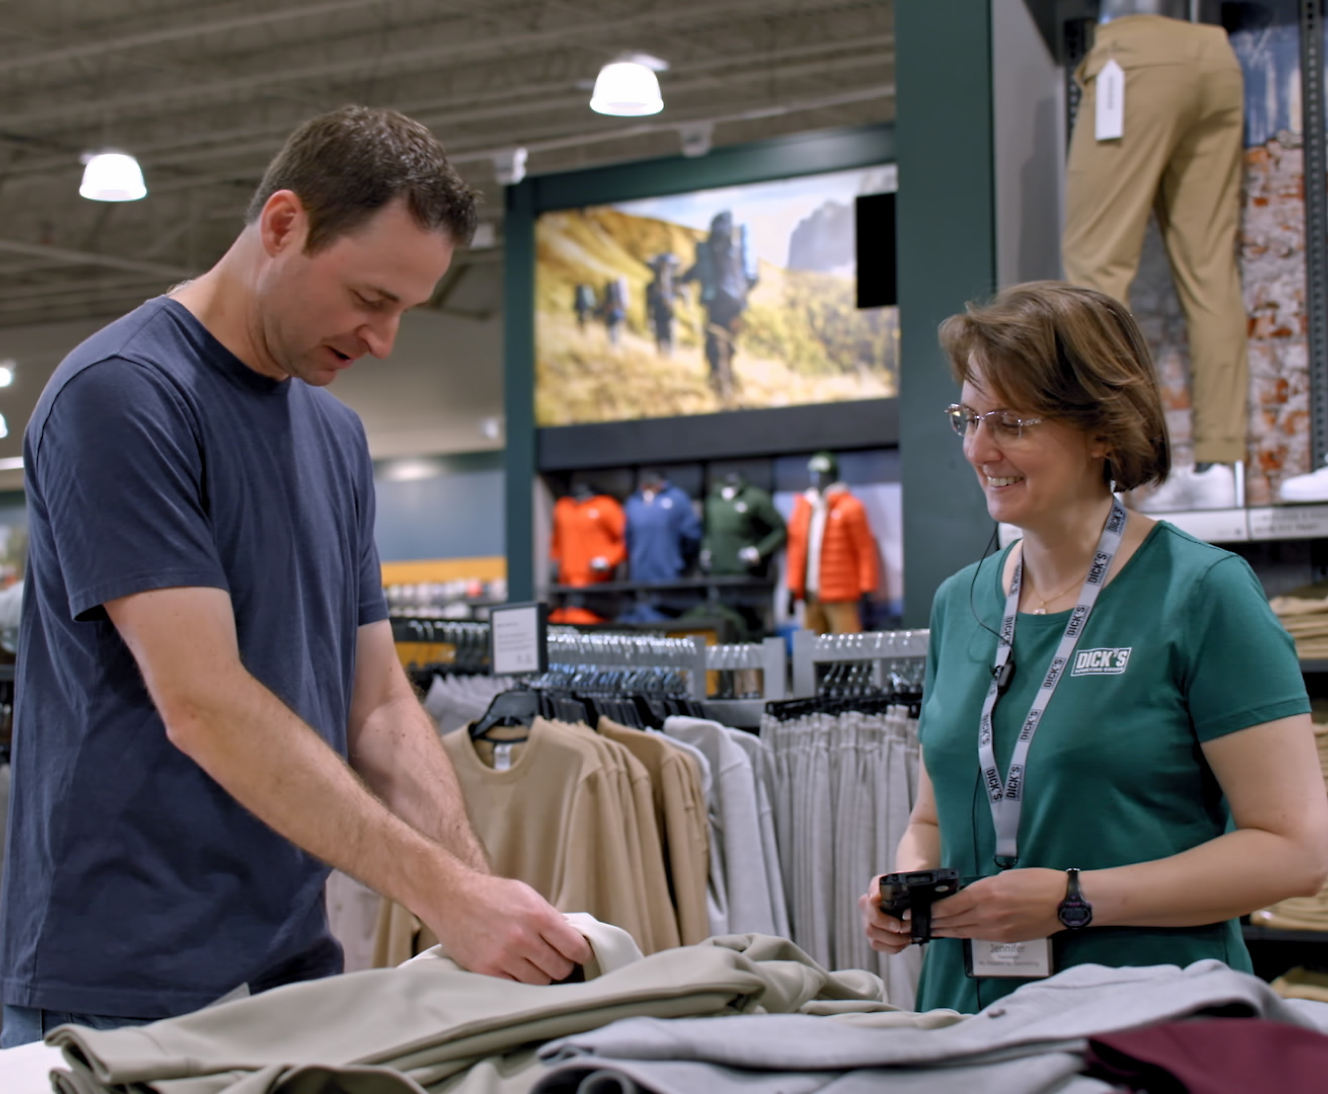 A man examines clothing at a store counter with assistance from a smiling female employee wearing a name tag.